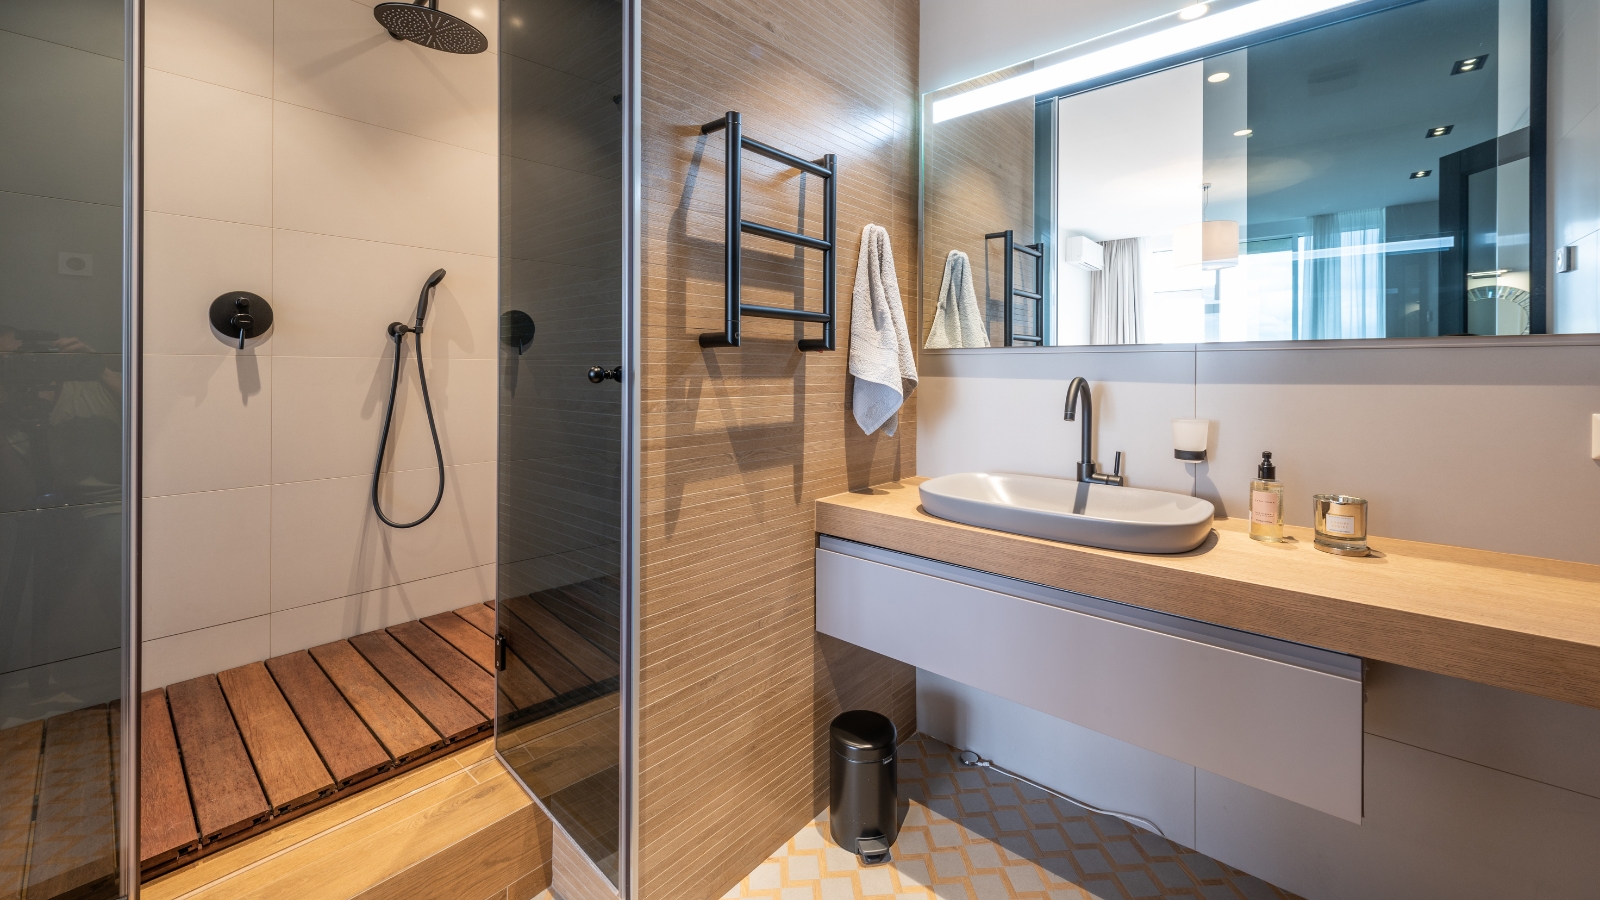 Bathroom renovator that does beach or coastal themes with steam room